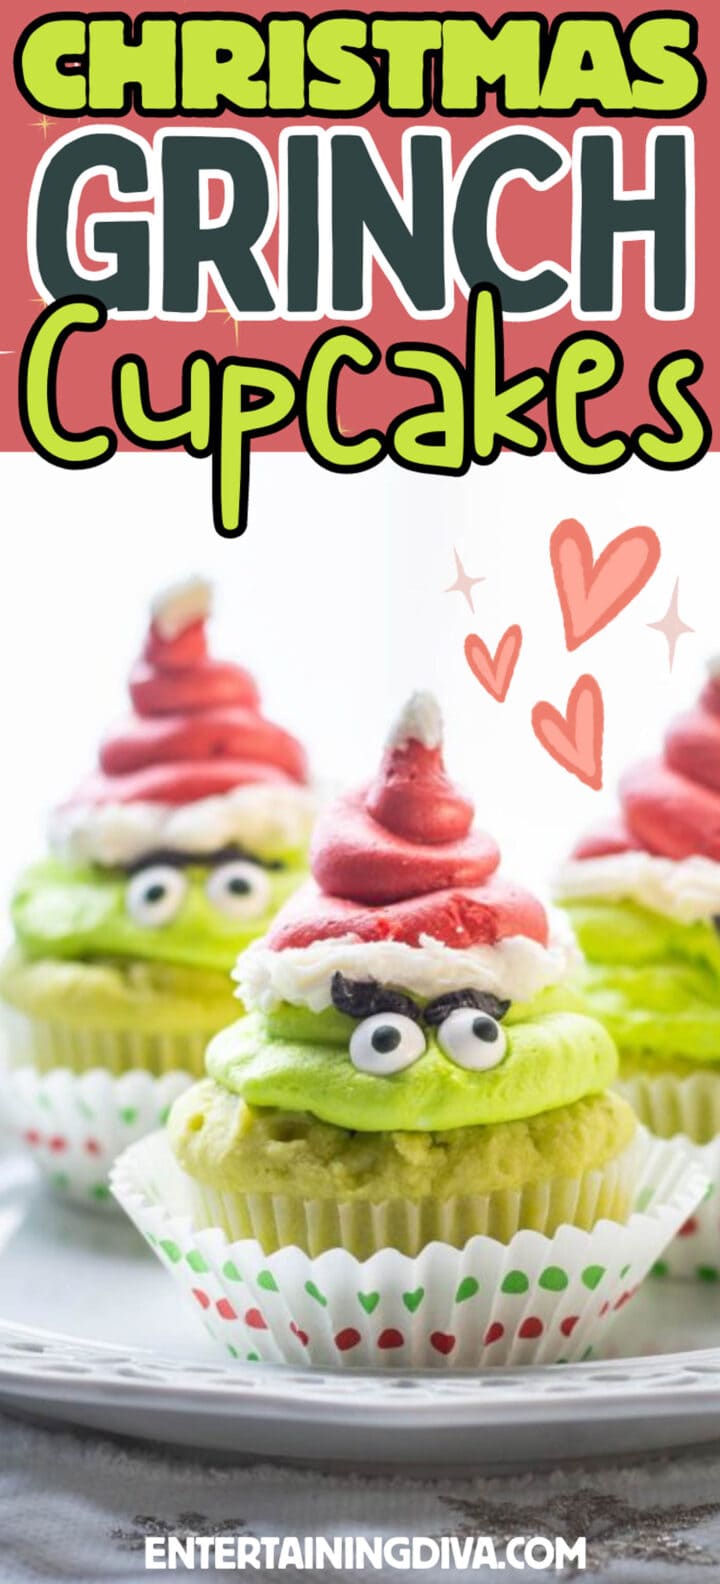 Christmas Grinch cupcakes with a heart inside and the text "Christmas